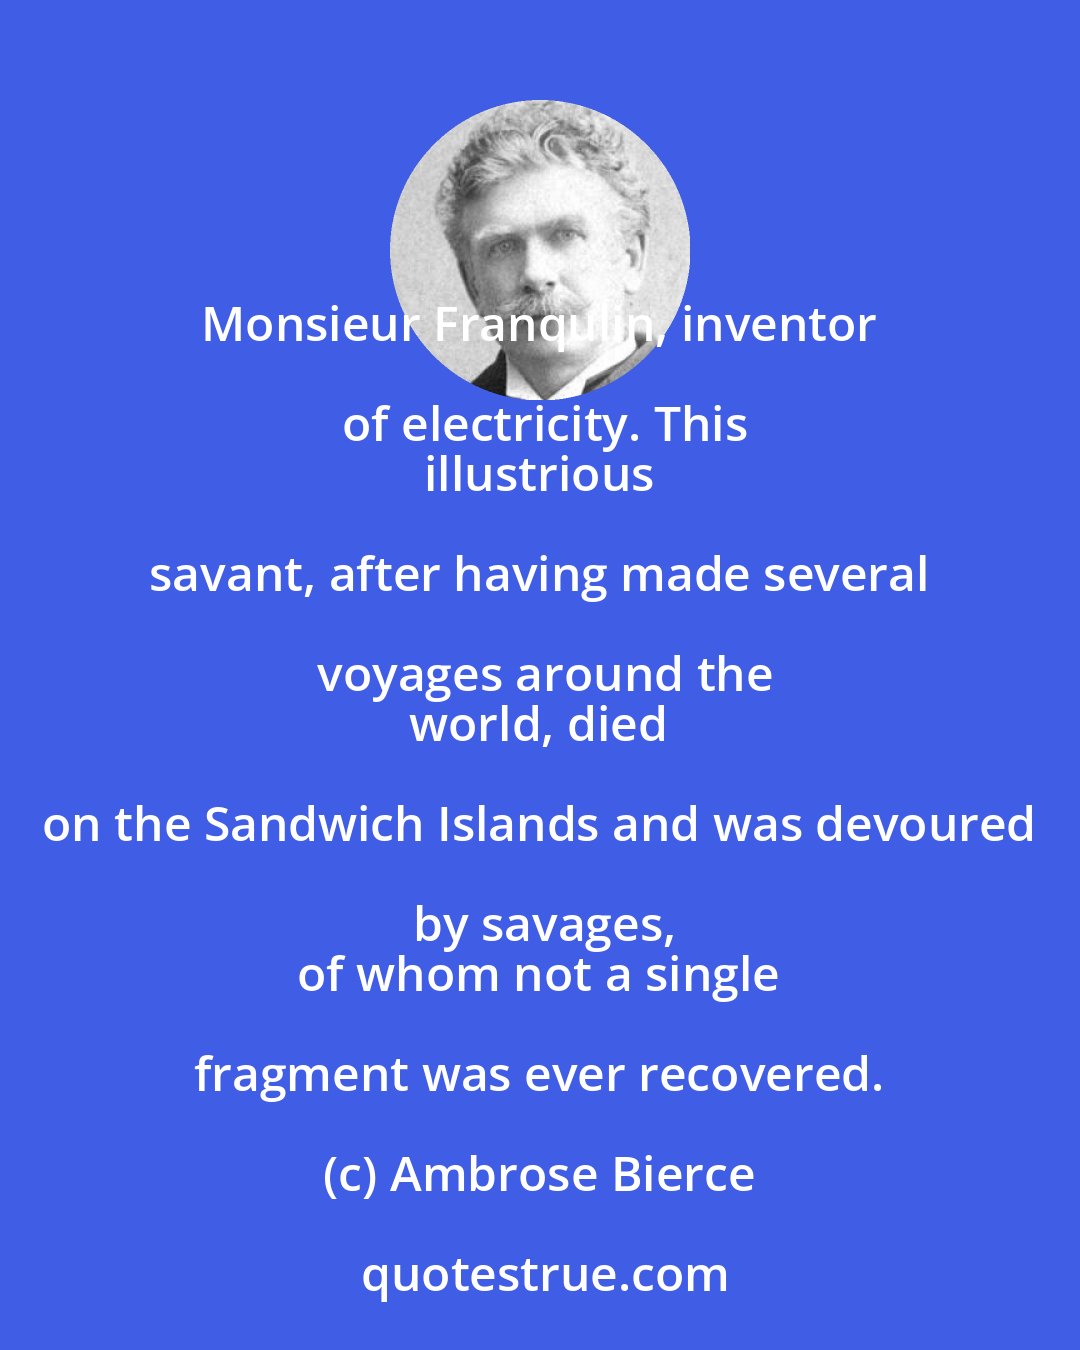 Ambrose Bierce: Monsieur Franqulin, inventor of electricity. This
 illustrious savant, after having made several voyages around the
 world, died on the Sandwich Islands and was devoured by savages,
 of whom not a single fragment was ever recovered.